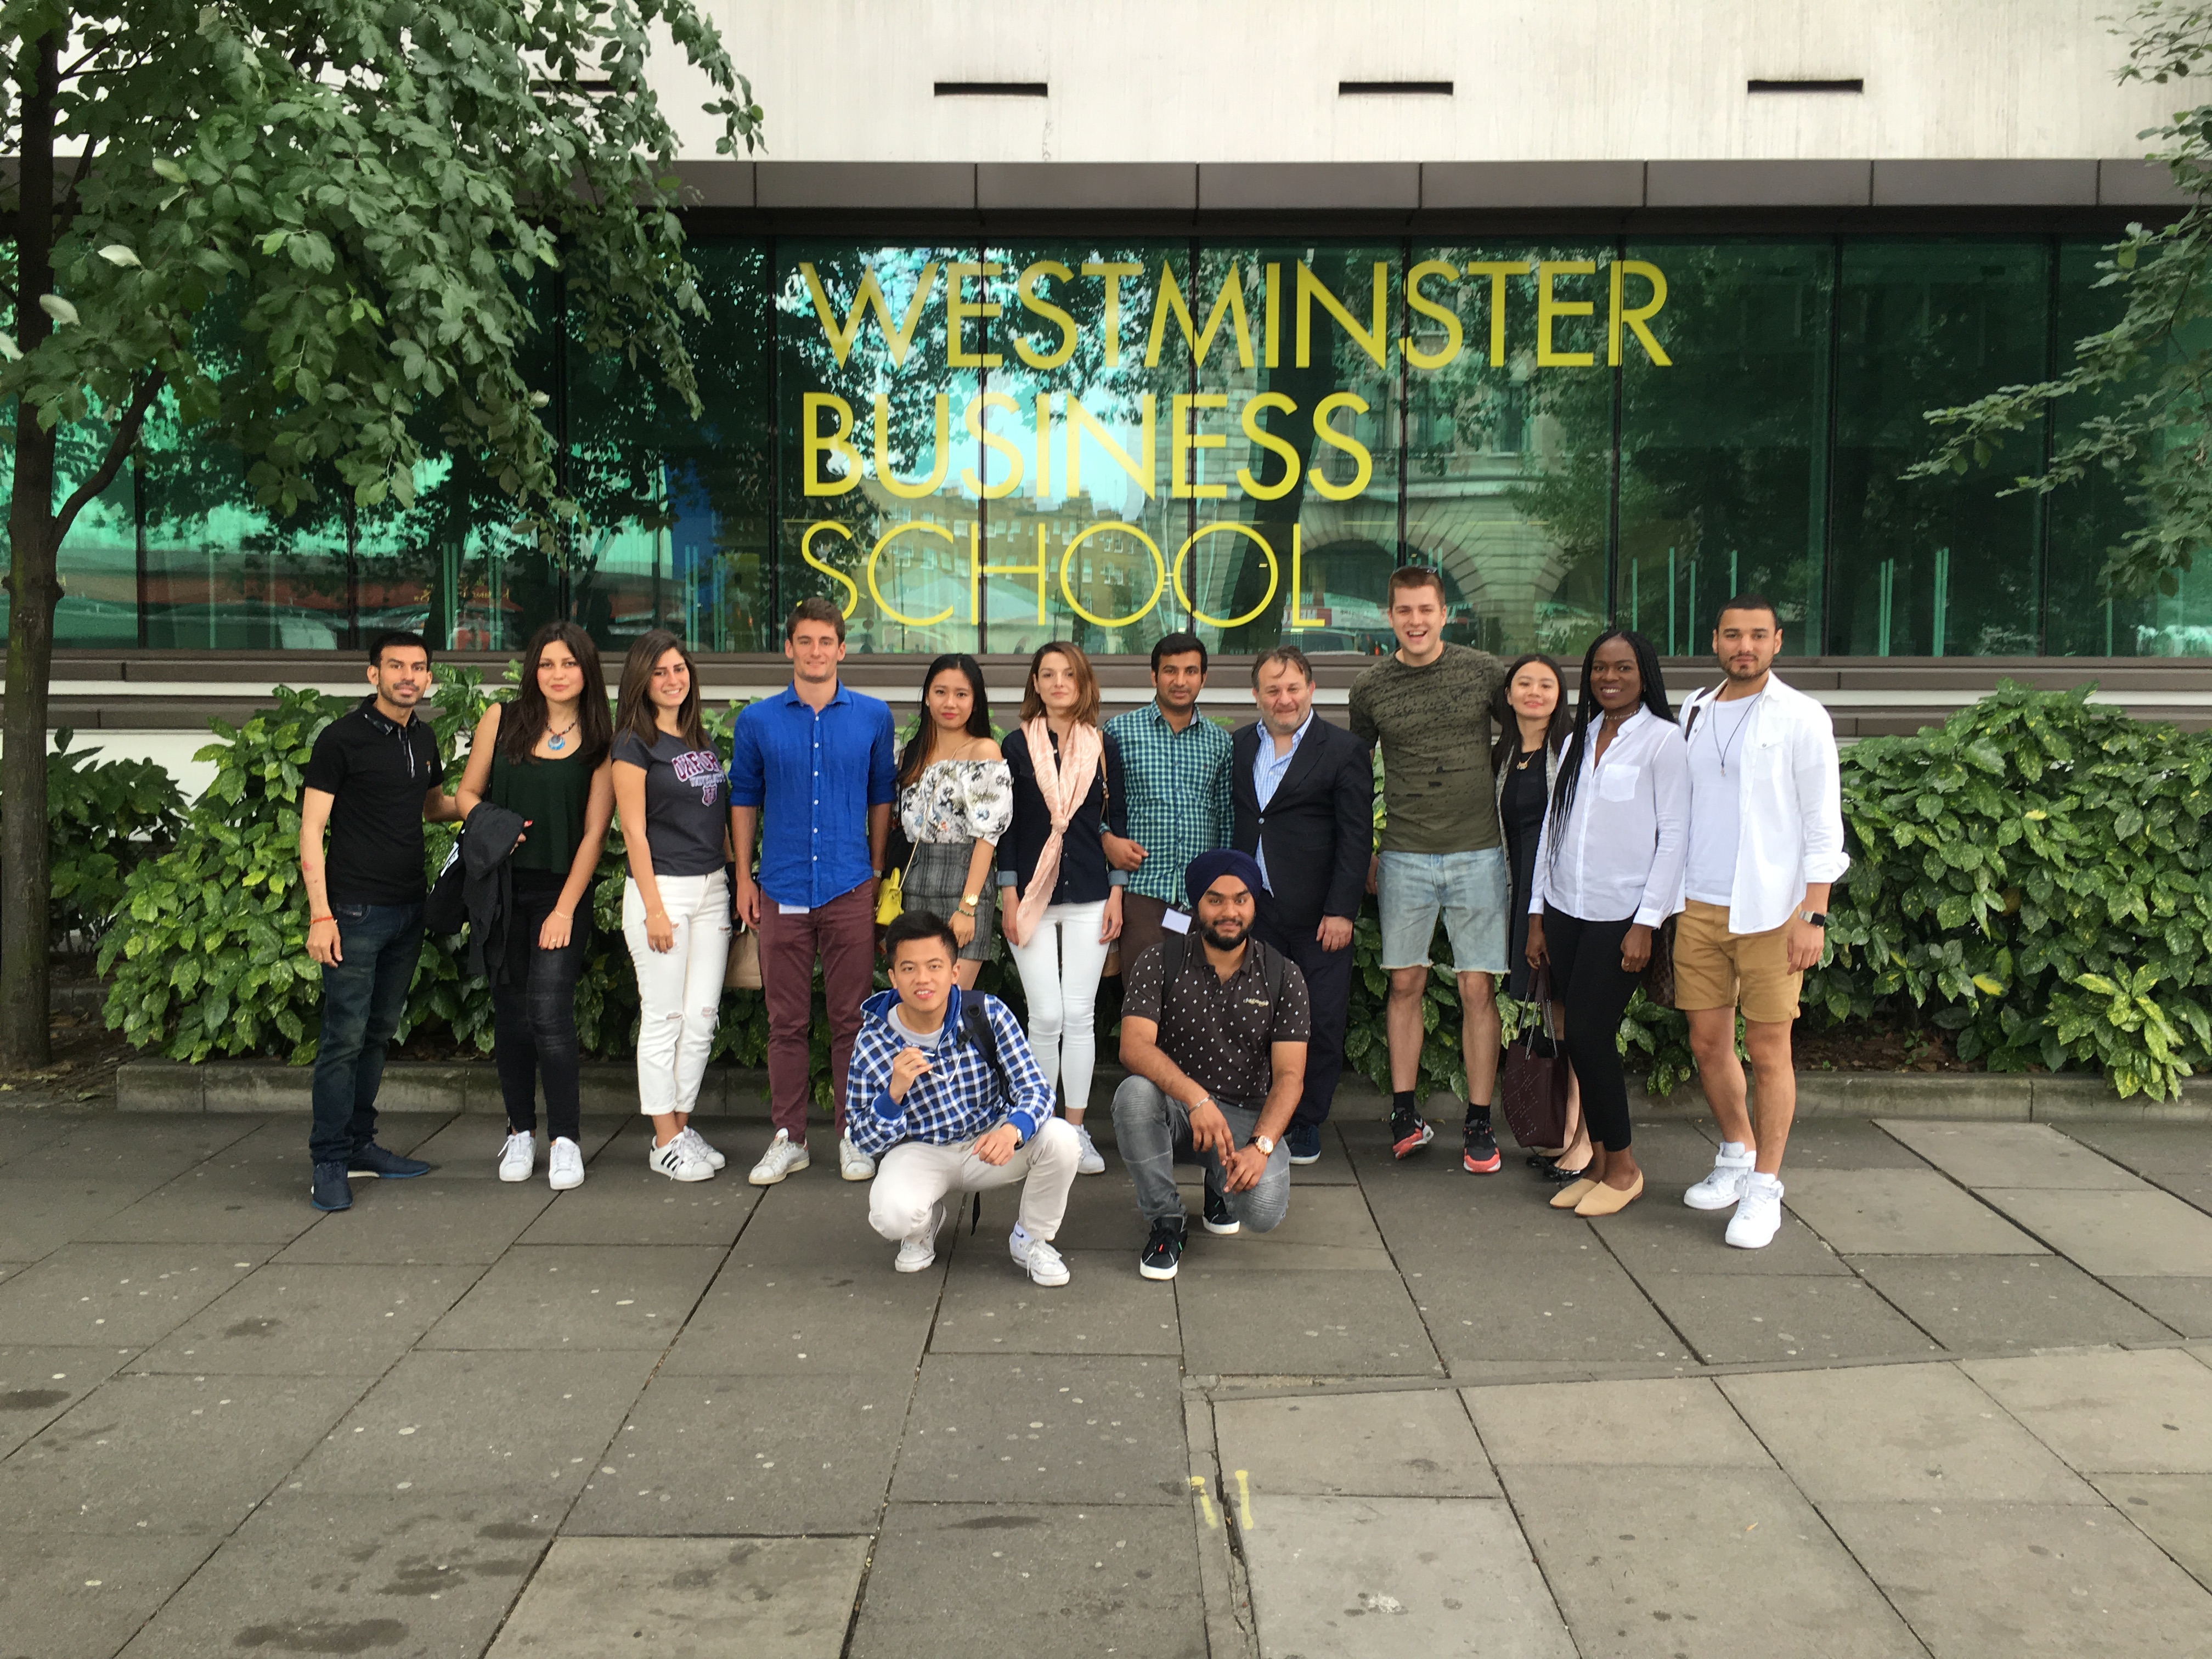 Paris School of Business students come to Westminster summer school to  learn about Brexit | University of Westminster